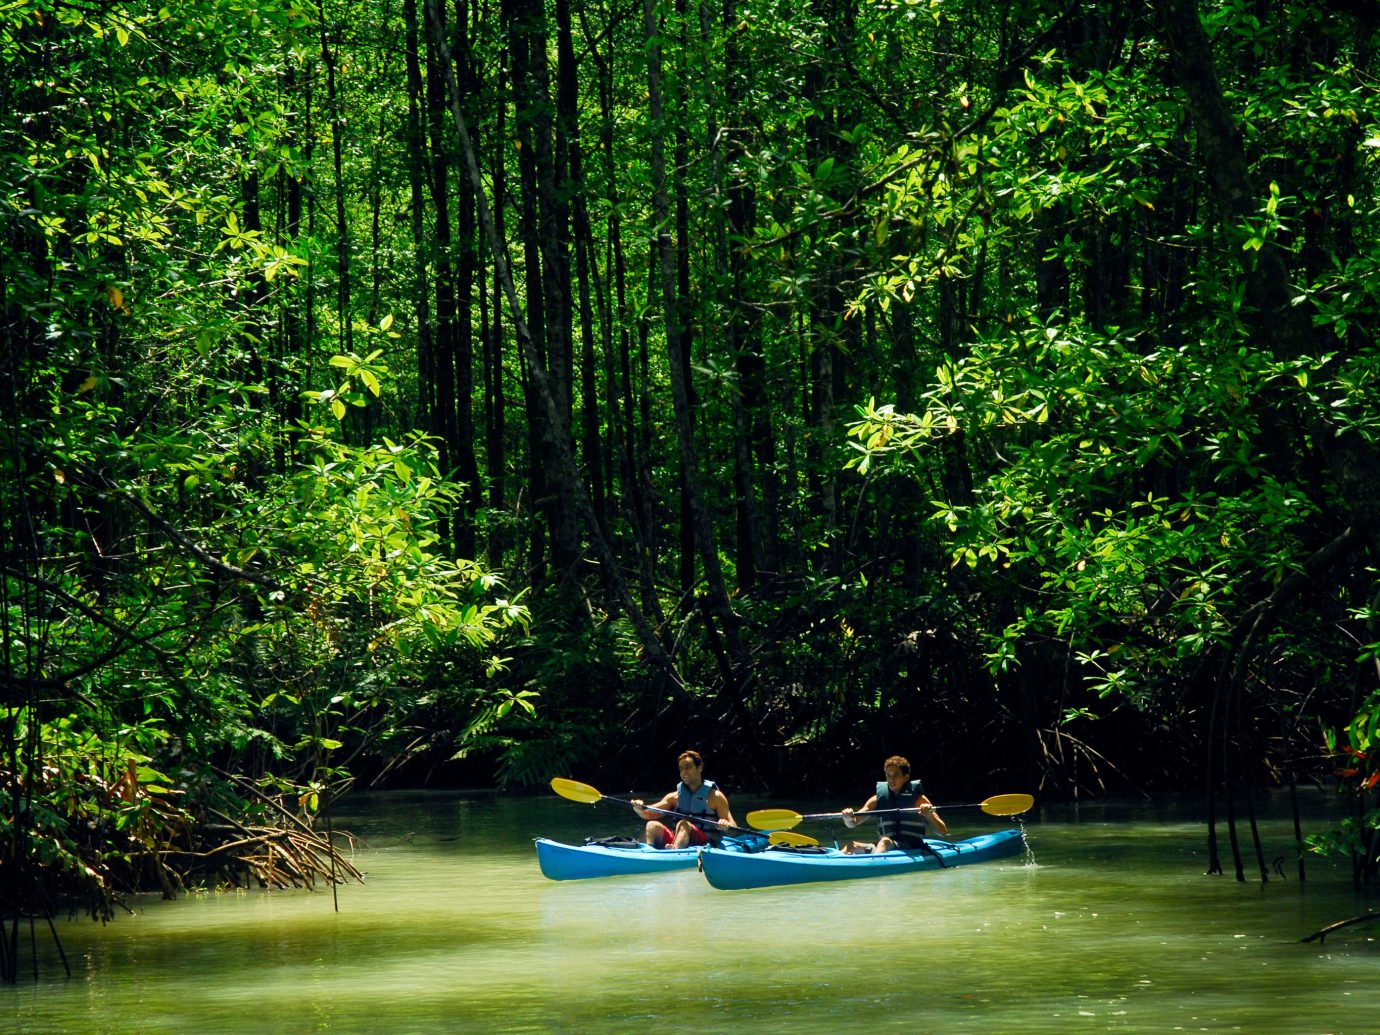 Adventure All-inclusive Budget Eco Jungle Outdoors Sport tree outdoor habitat Nature green natural environment Boat Forest River vehicle canoe bayou boating rainforest woodland surrounded wooded